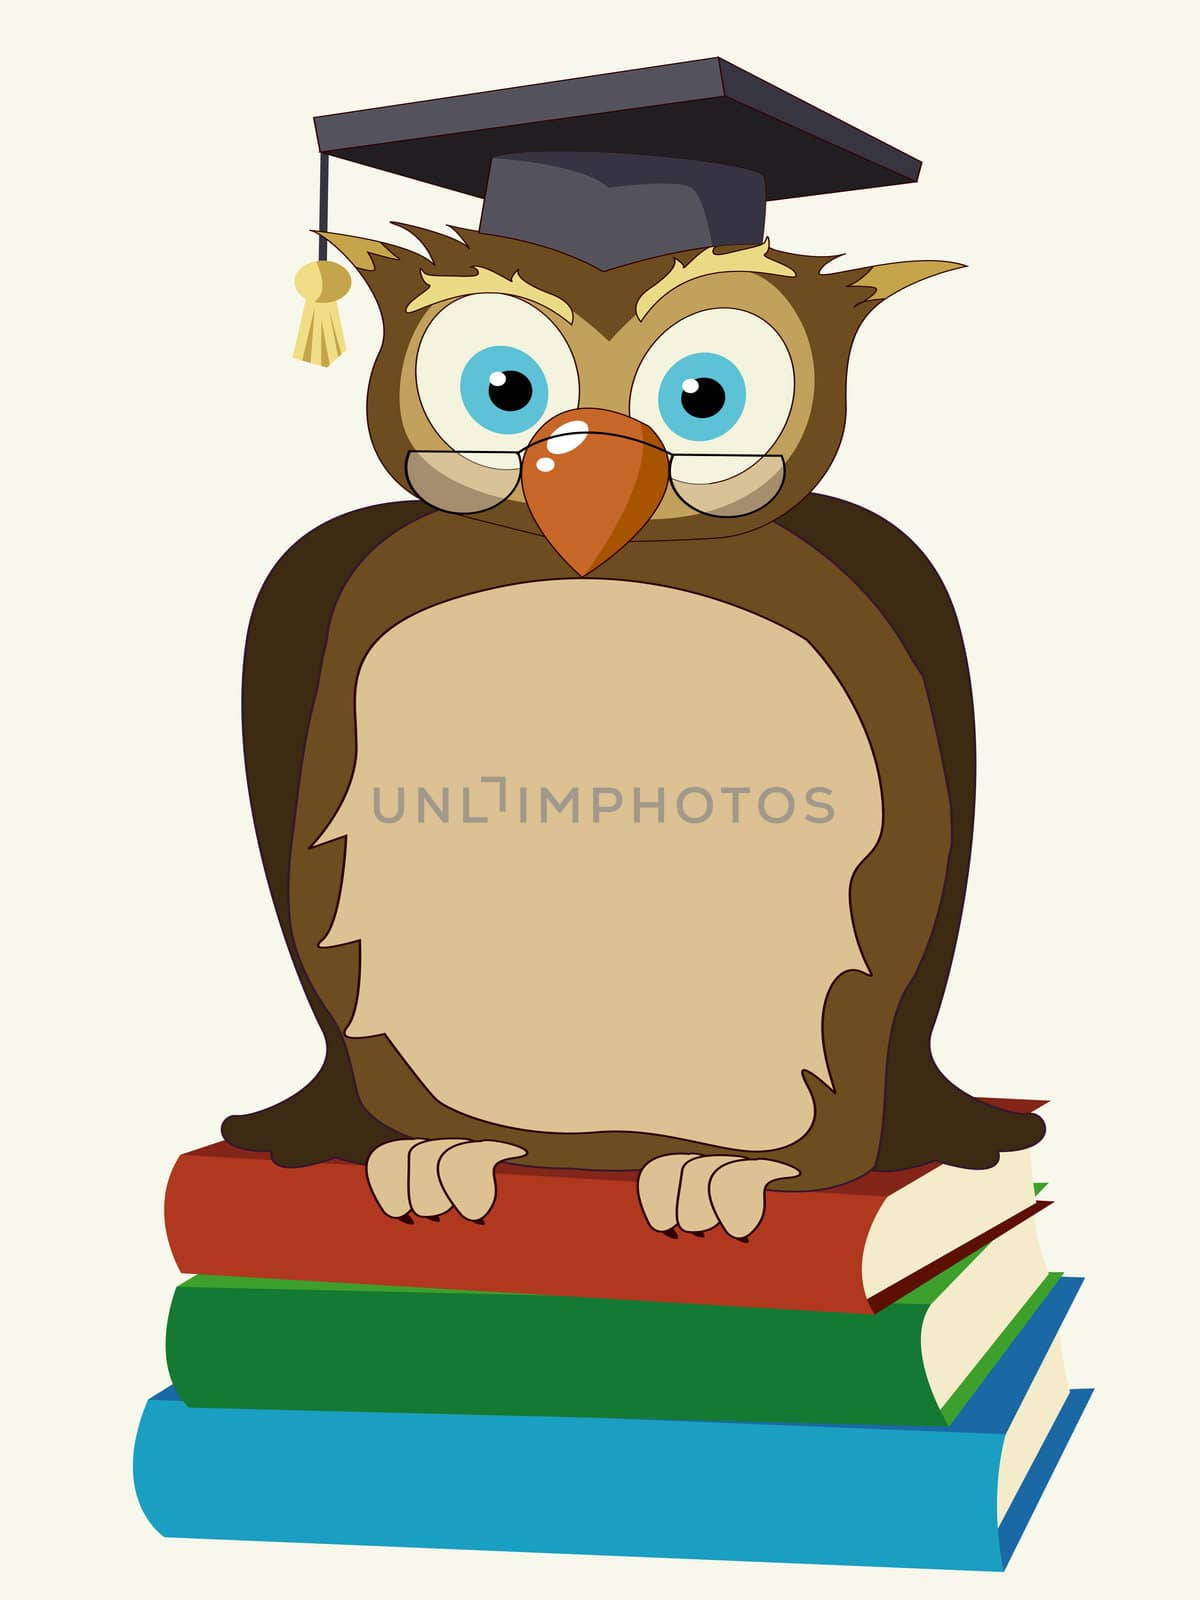 Stylized owl with eye glasses sitting on top of books